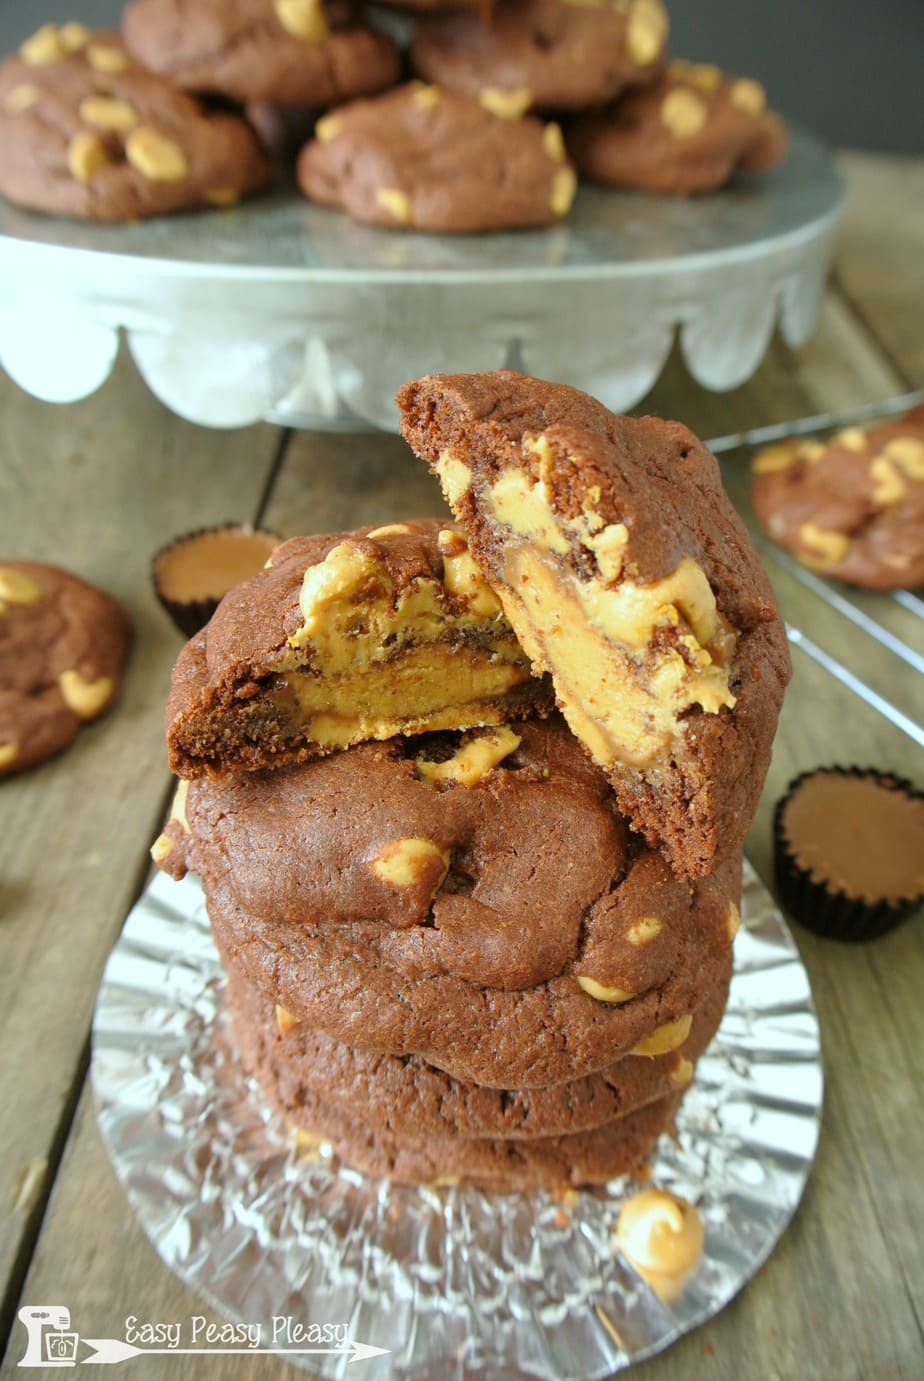 Chocolate Peanut Butter Cup Cookies using only 5 Ingredients with the help of a cake mix.